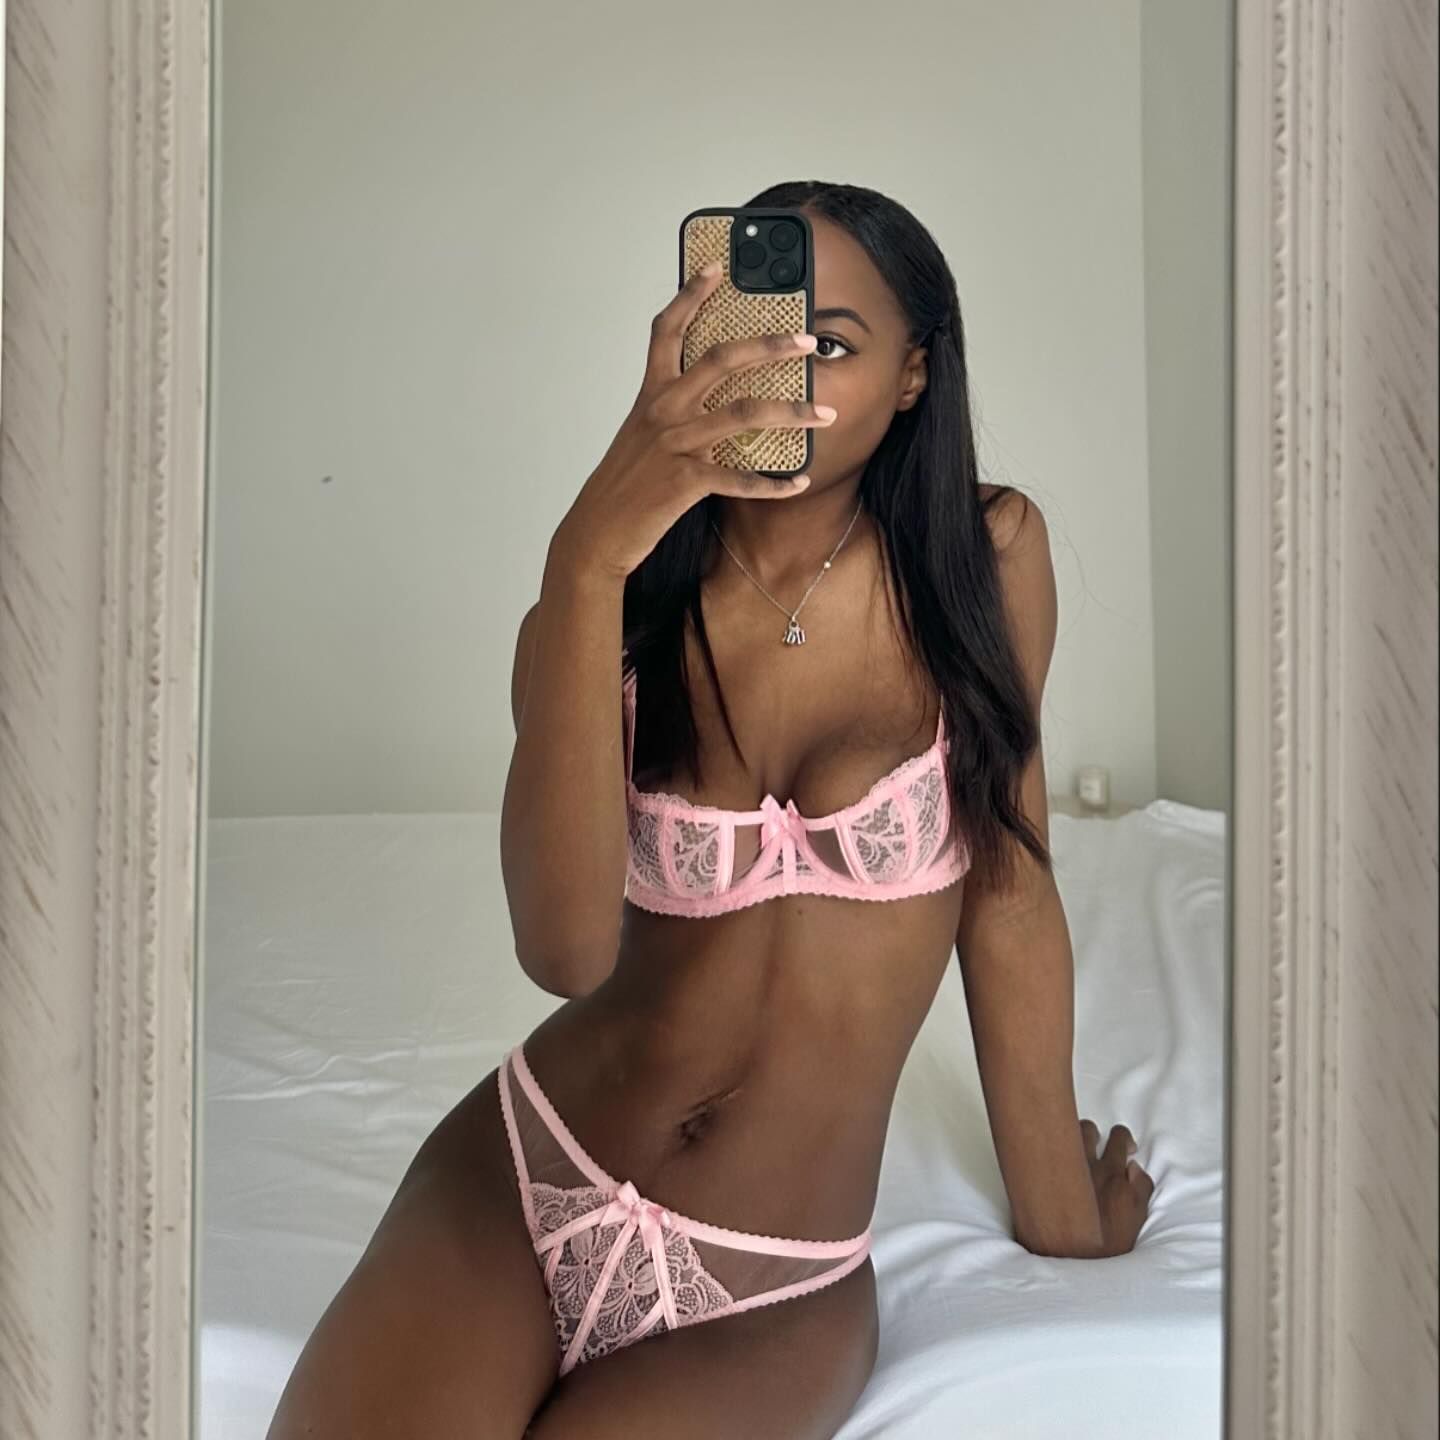 an influencer poses for a mirror selfie in a pink lace lingerie set from Agent Provocateur